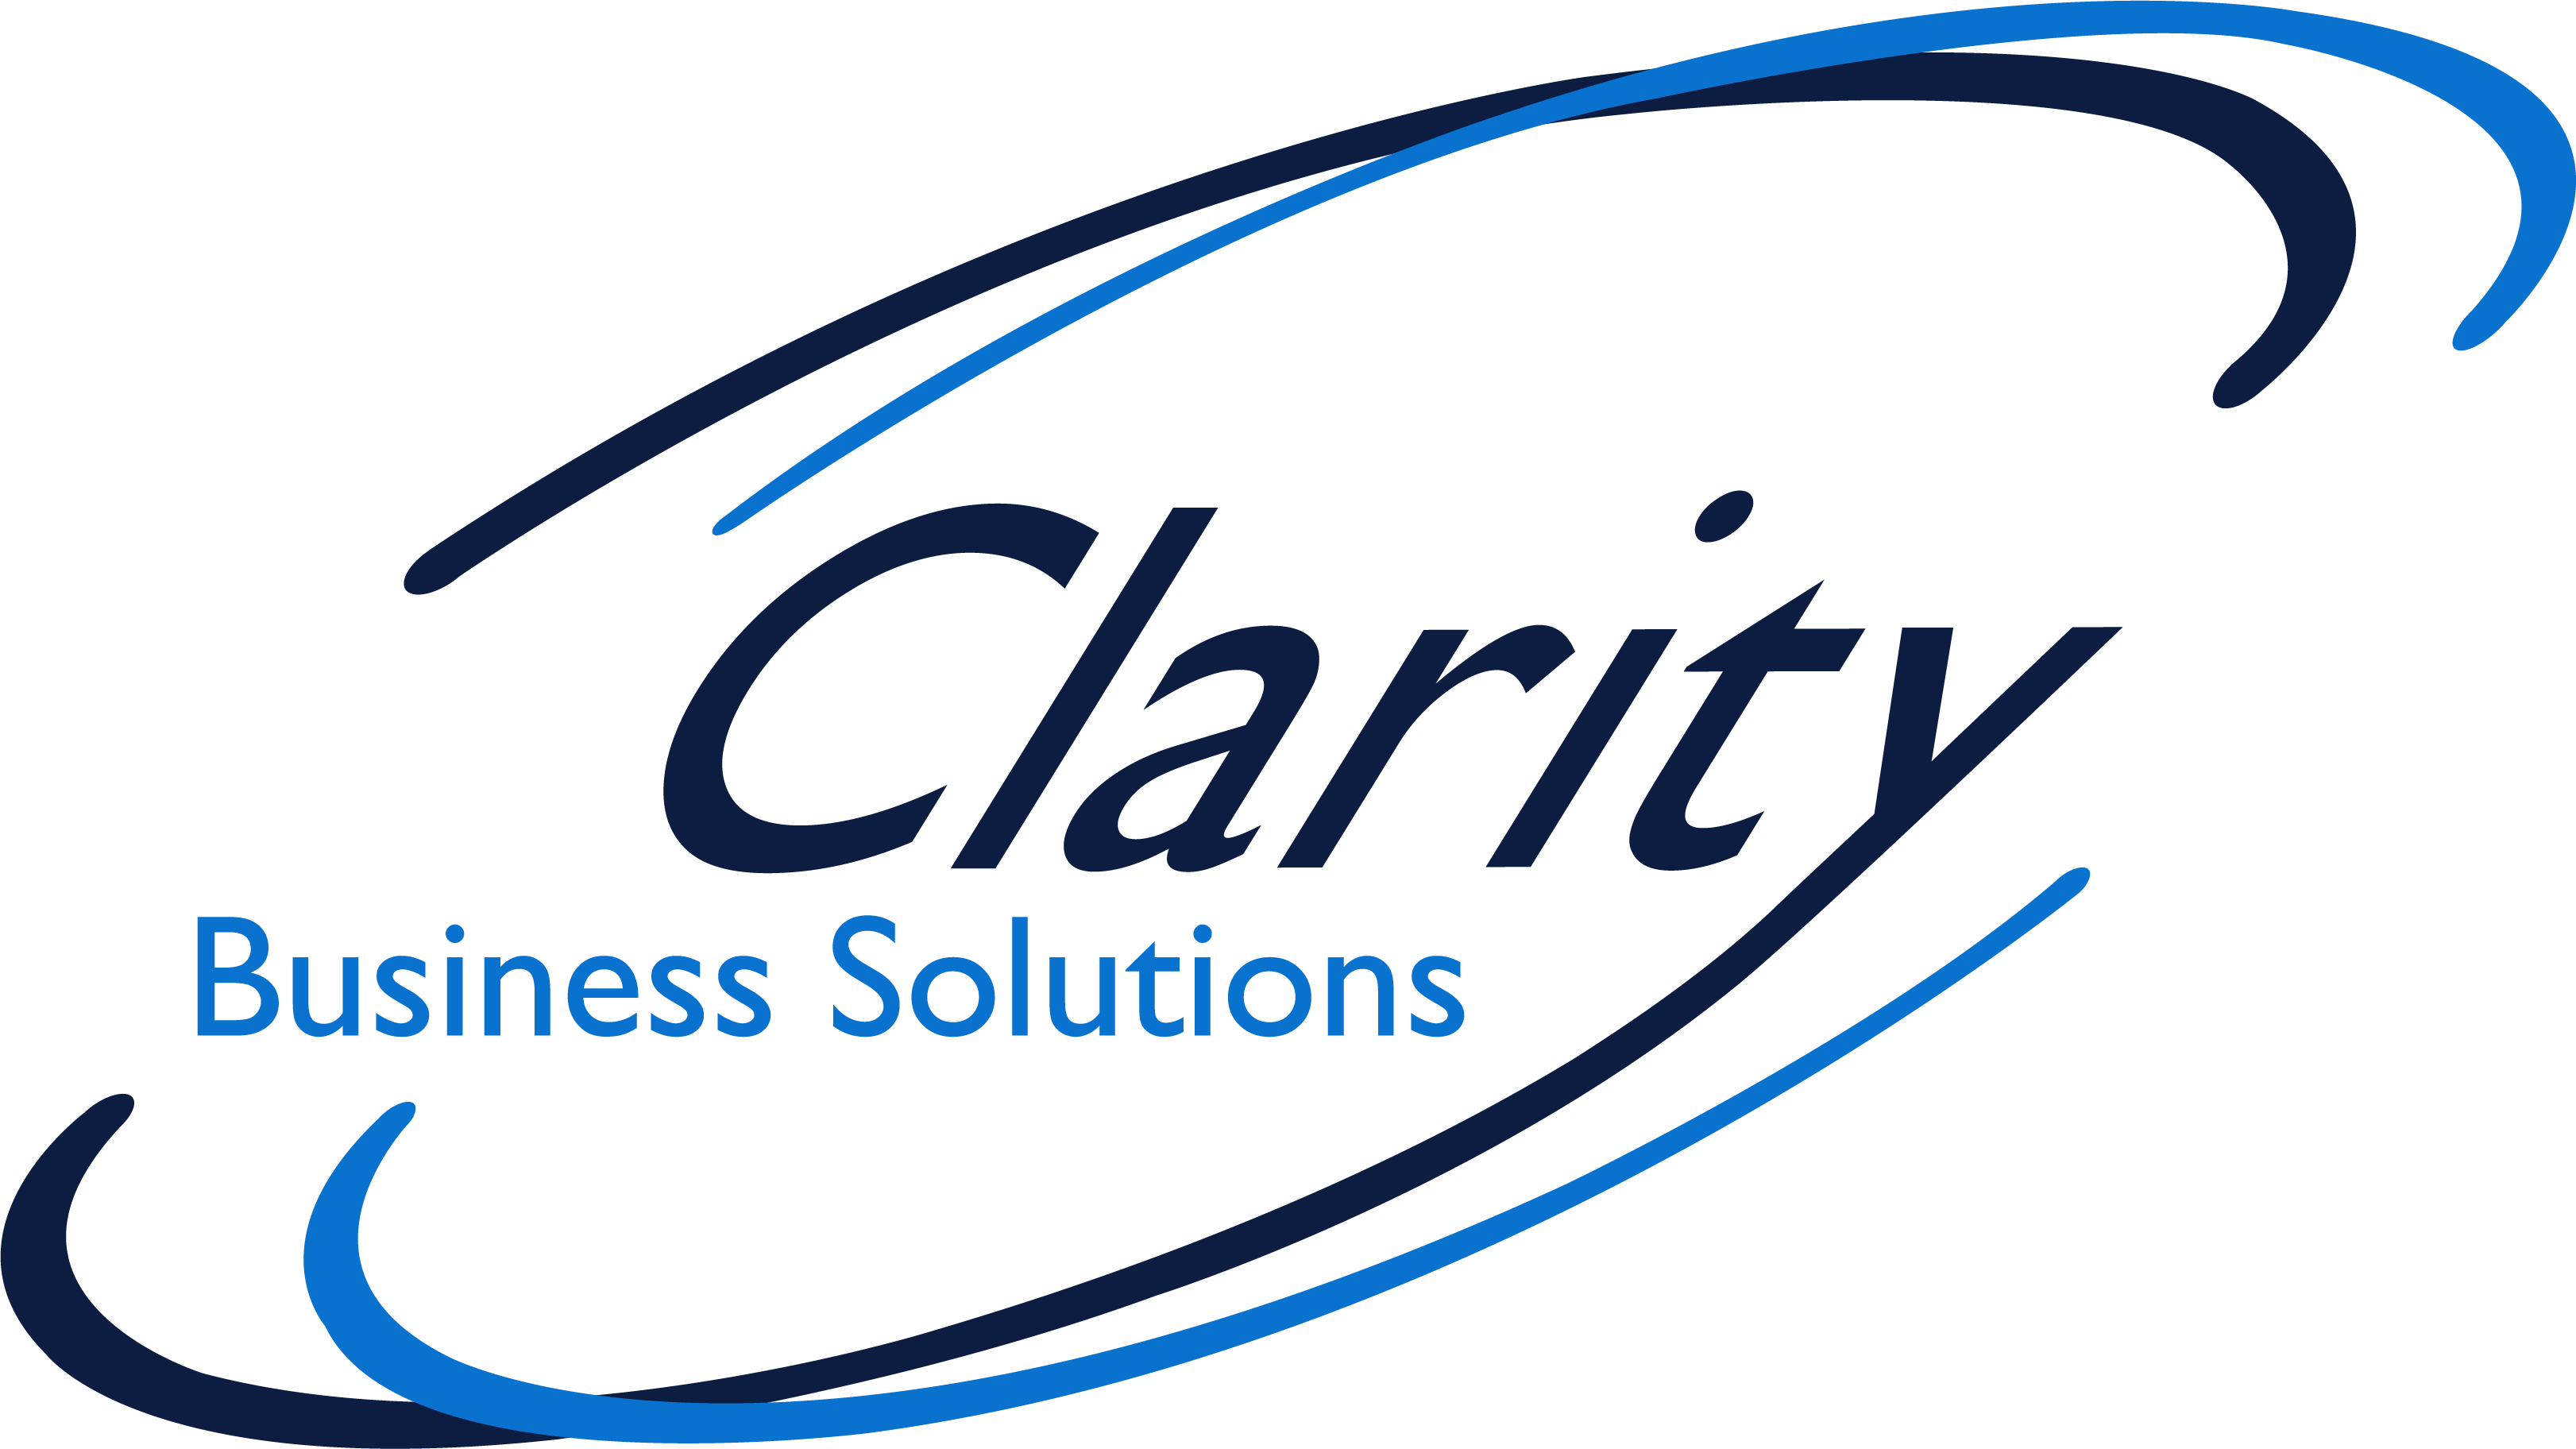 Clarity Business Solutions